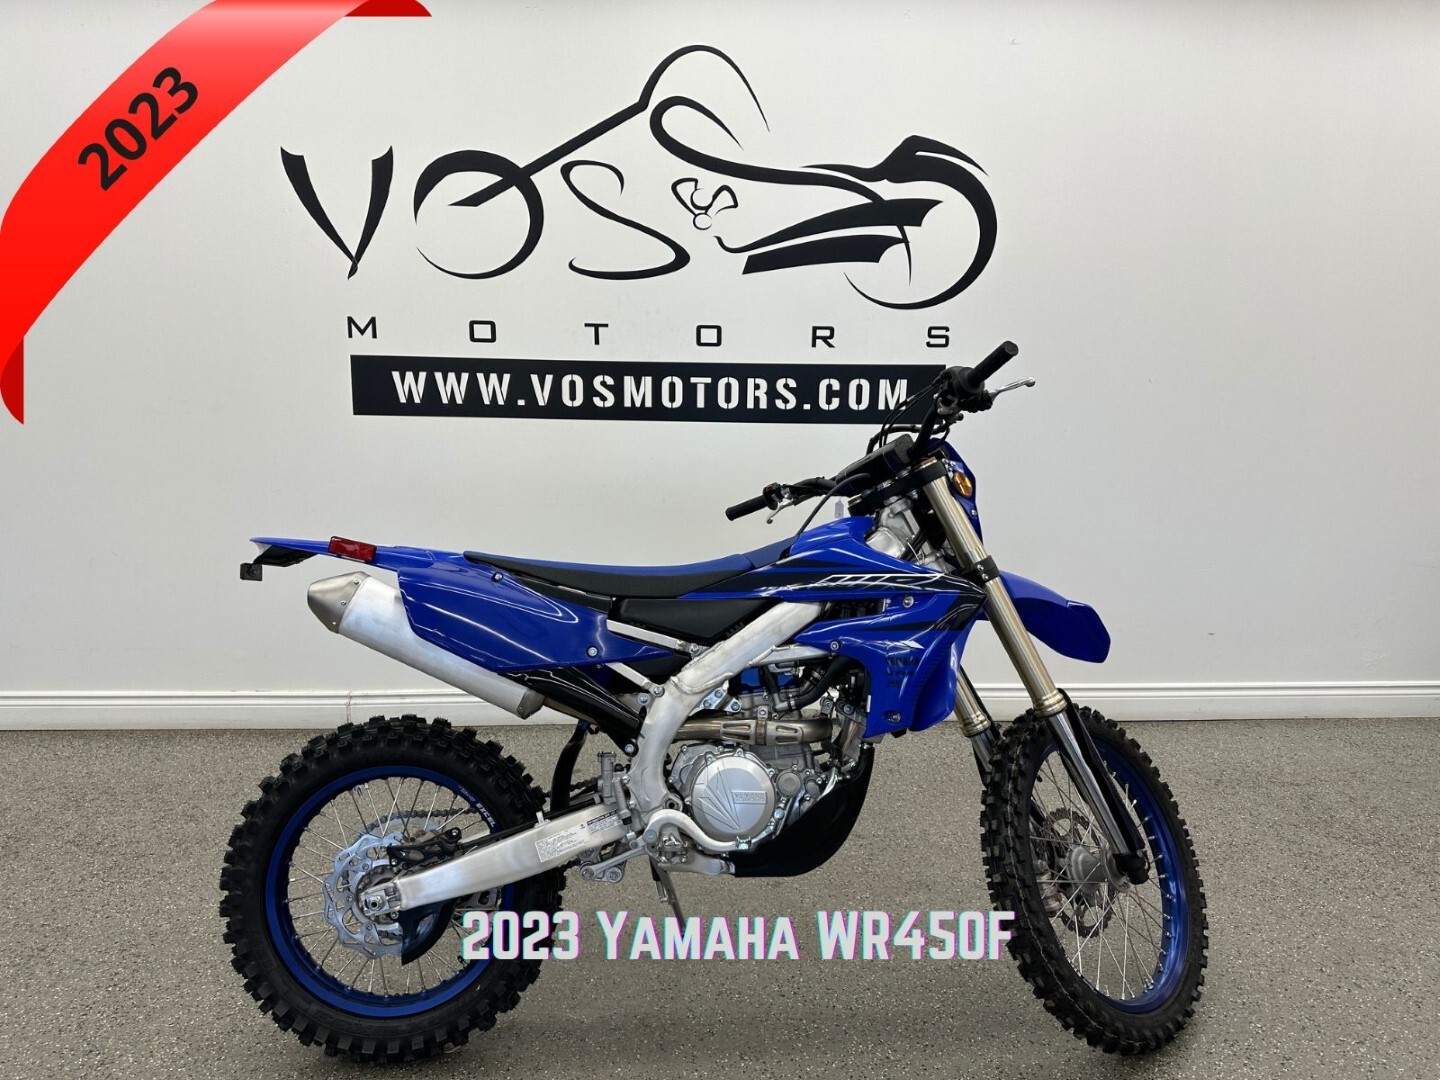 2023 Yamaha WR450FPL WR450F - V5332NP - -No Payments for 1 Year**